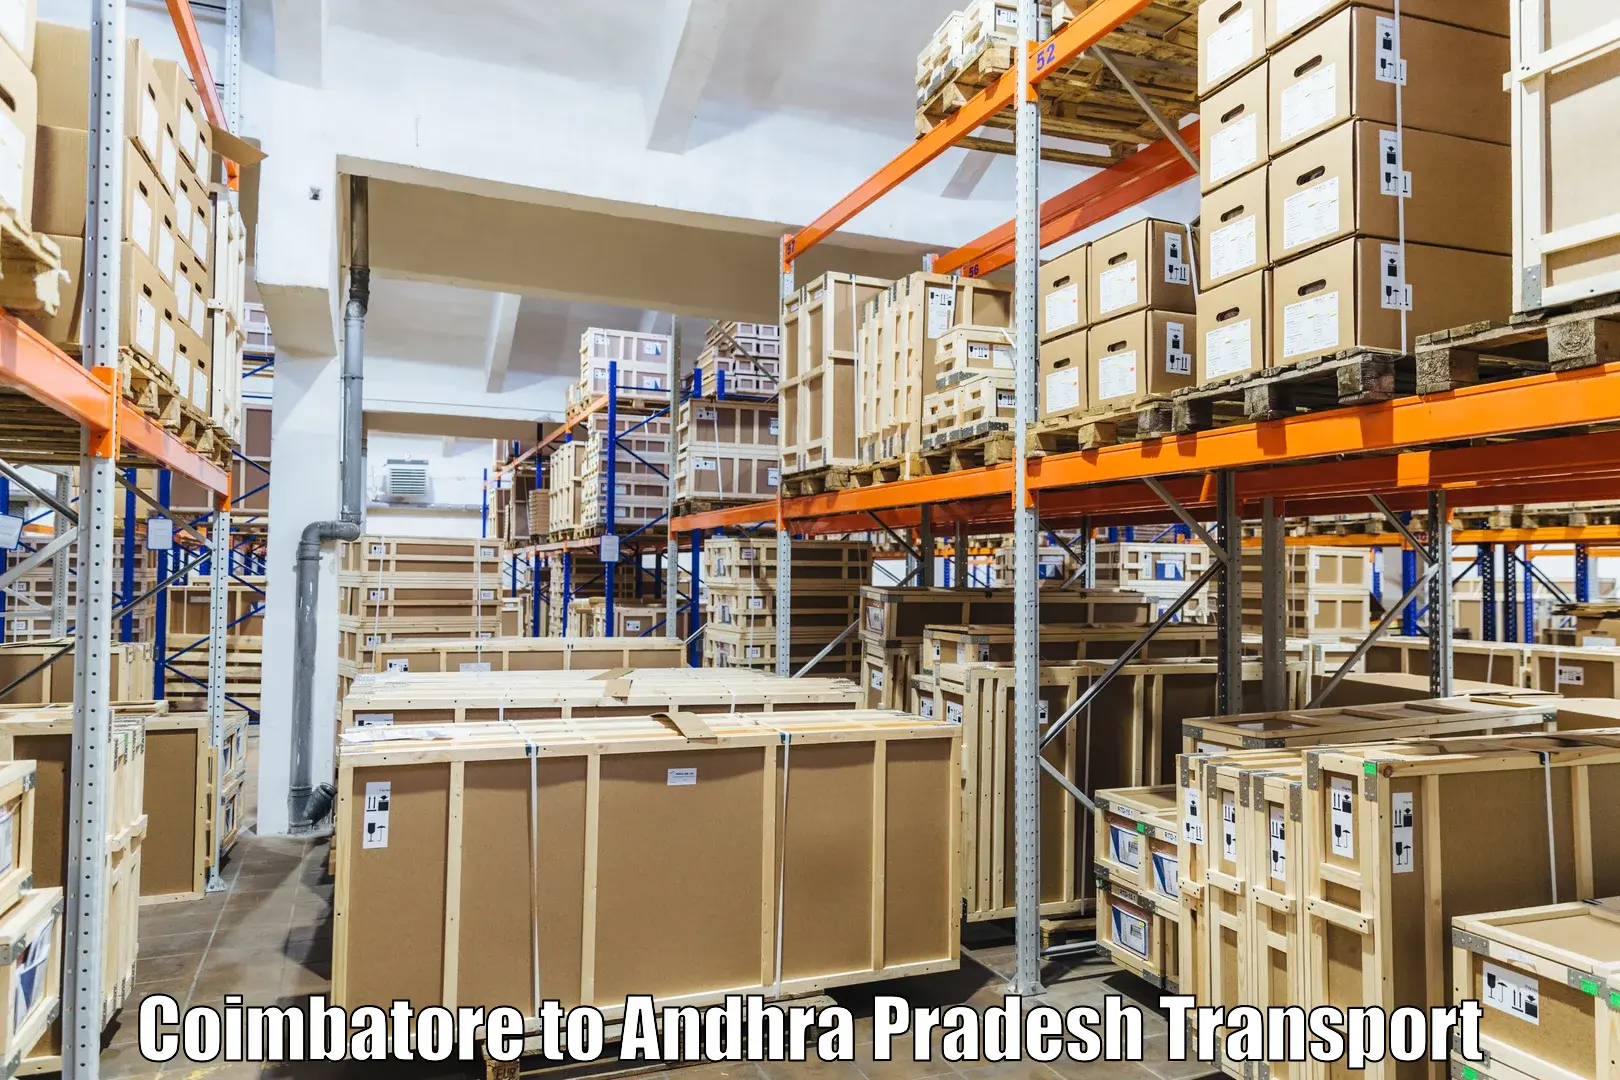 Shipping services in Coimbatore to Chirala